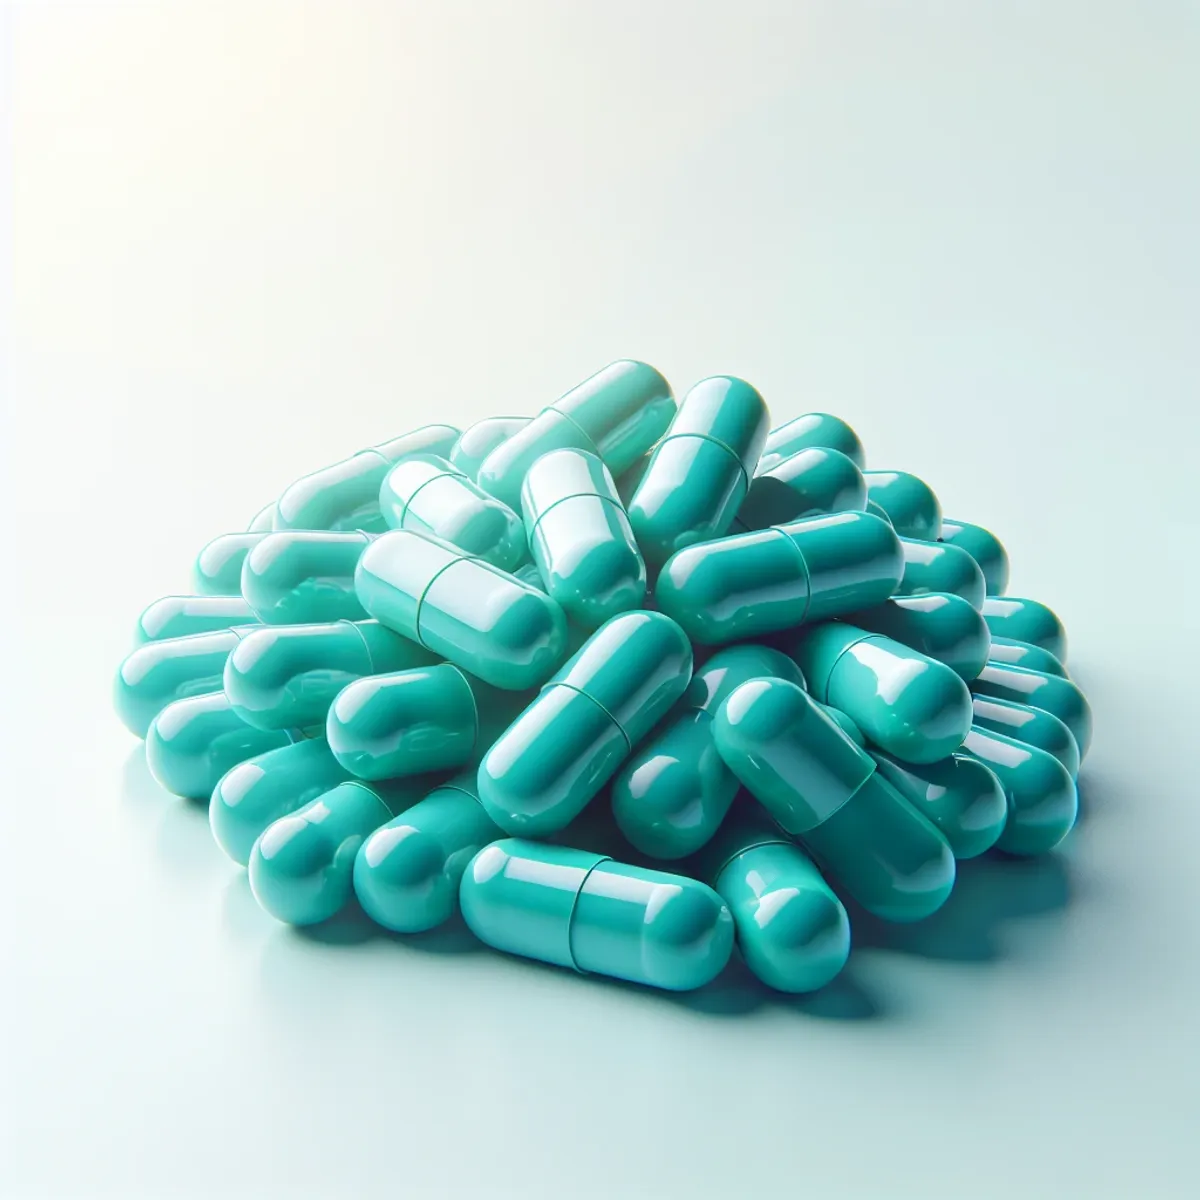 Fluorescent teal BPC-157 capsules on white background.